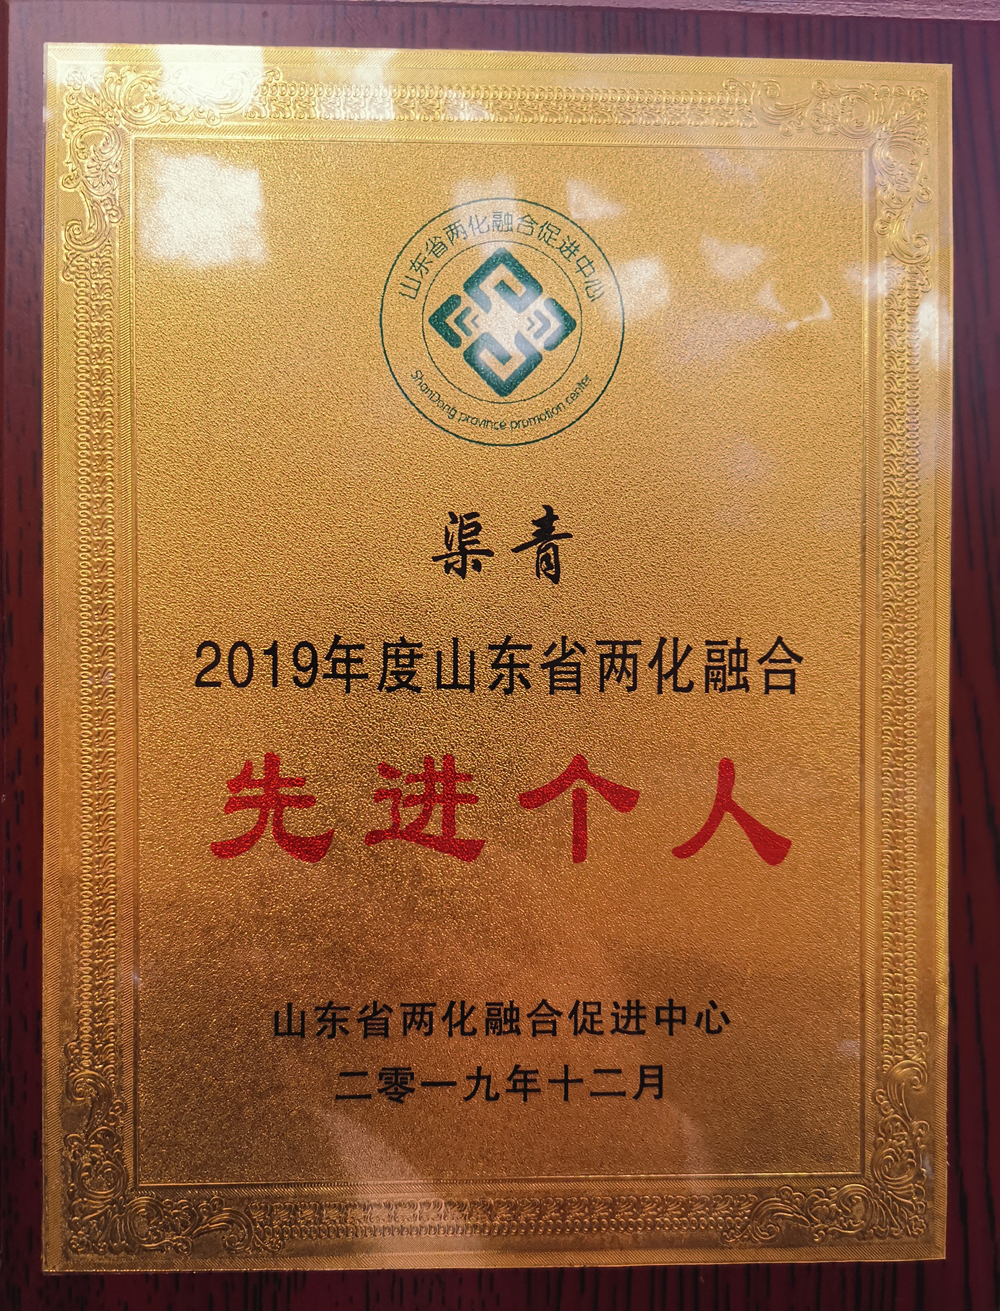 Warm Congratulations To China Coal Group Chairman Qu Qing For Being Named The Advanced Individual 